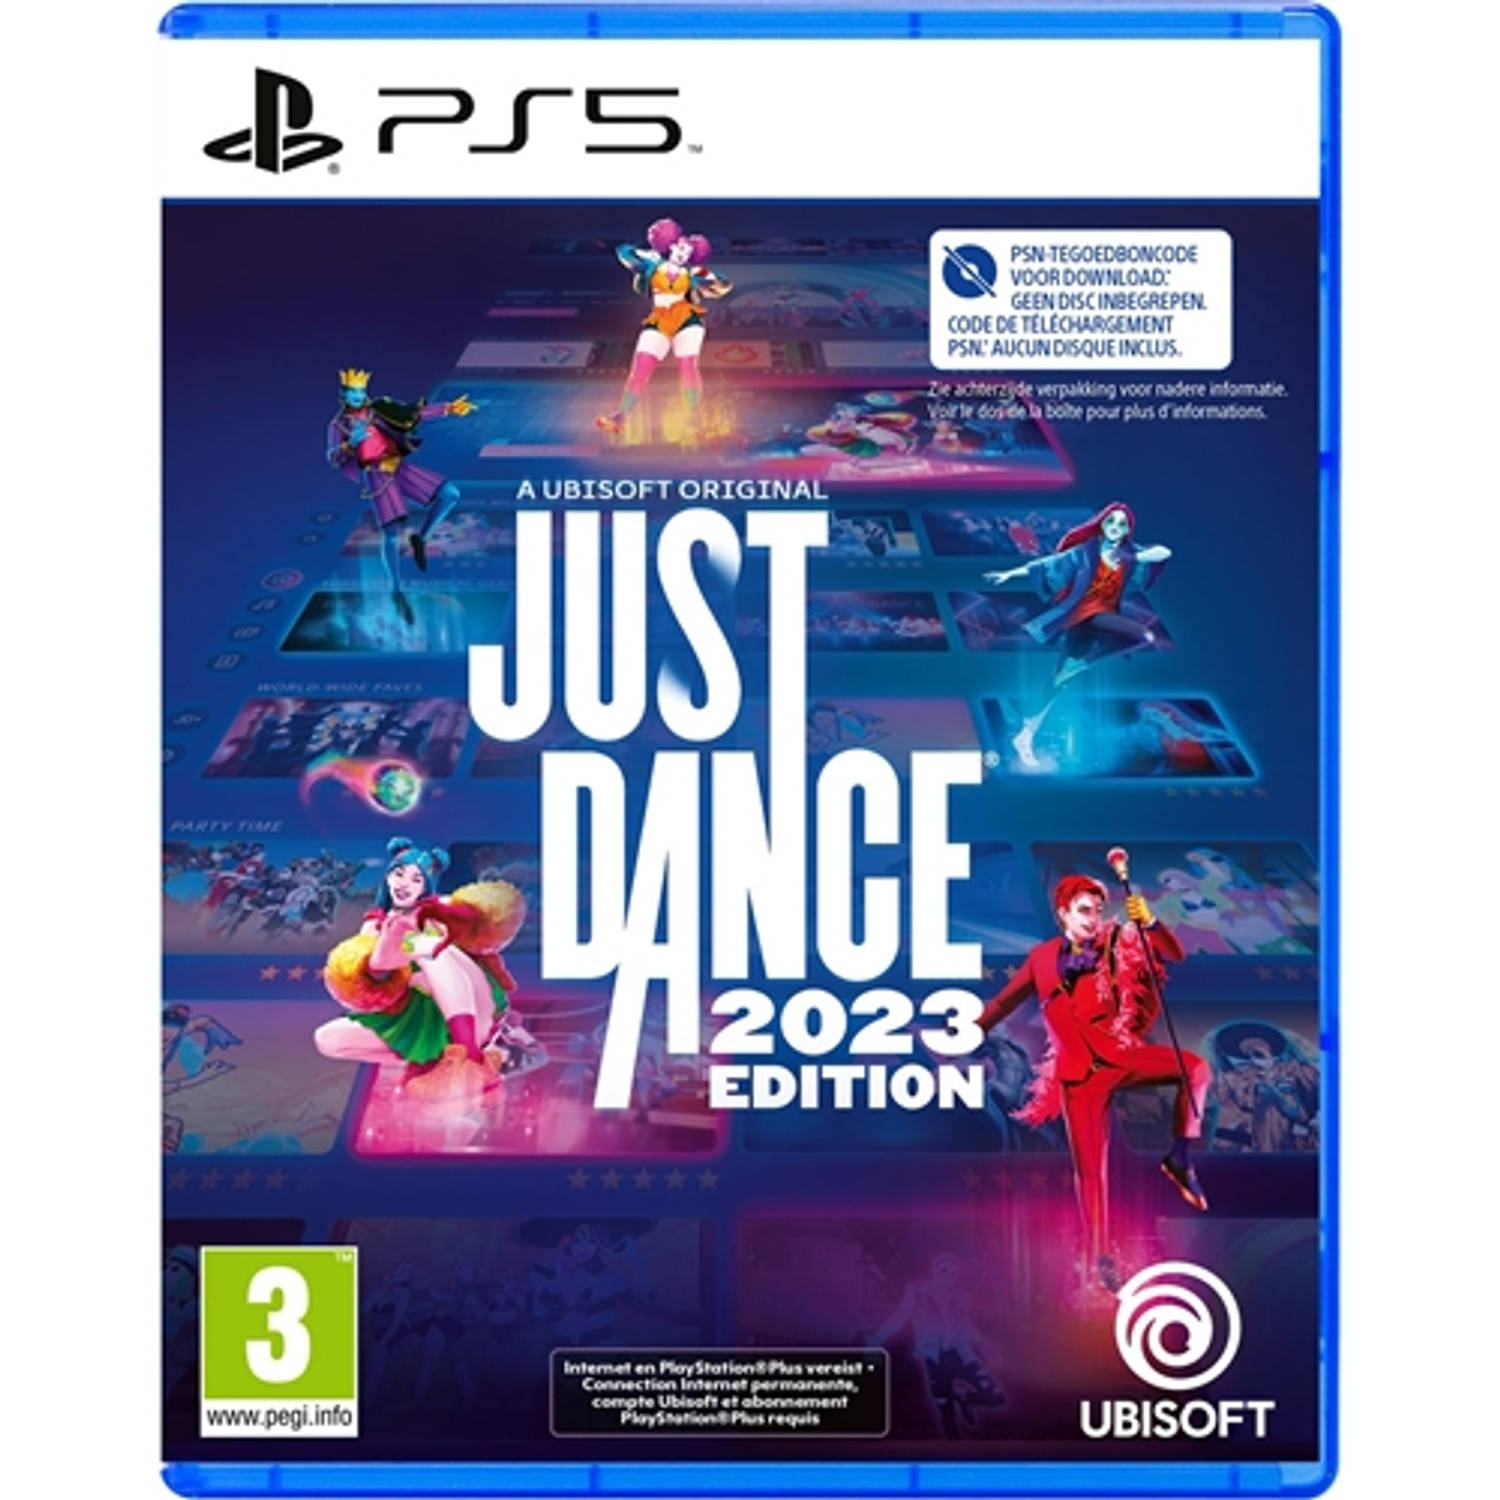 Just Dance 2023. (Playstation 5)